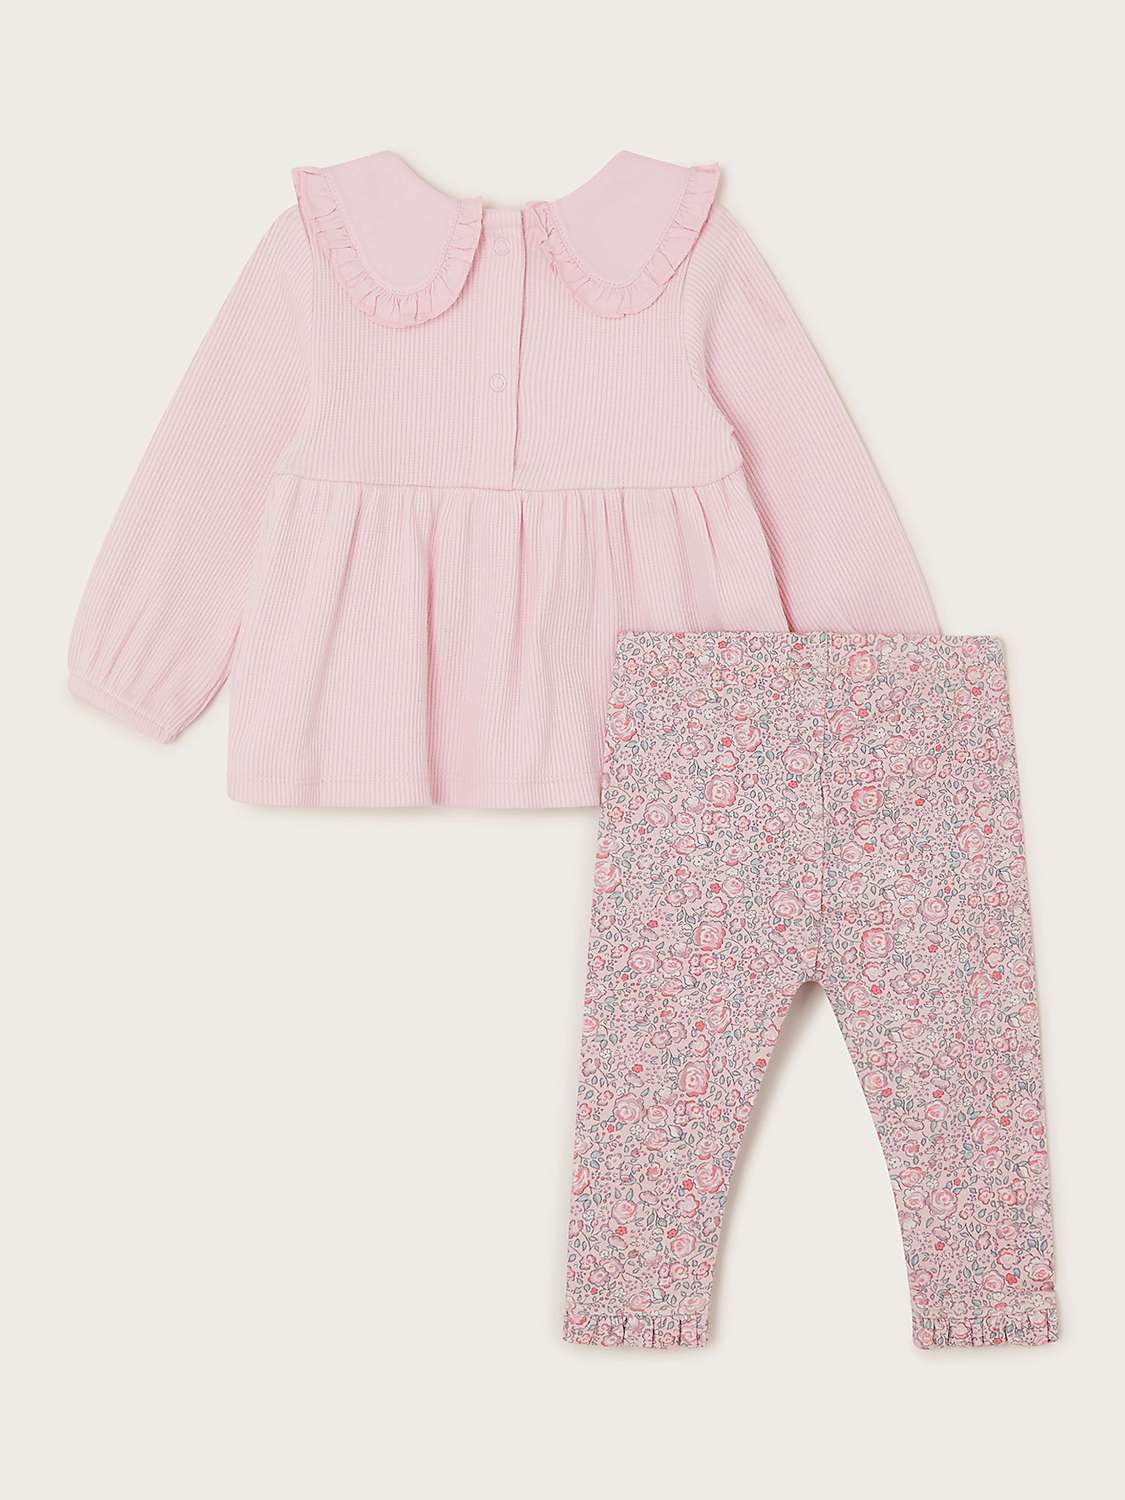 Buy Monsoon Baby Embriodered Rib Top & Floral Ditsy Print Leggings Set, Lilac Online at johnlewis.com